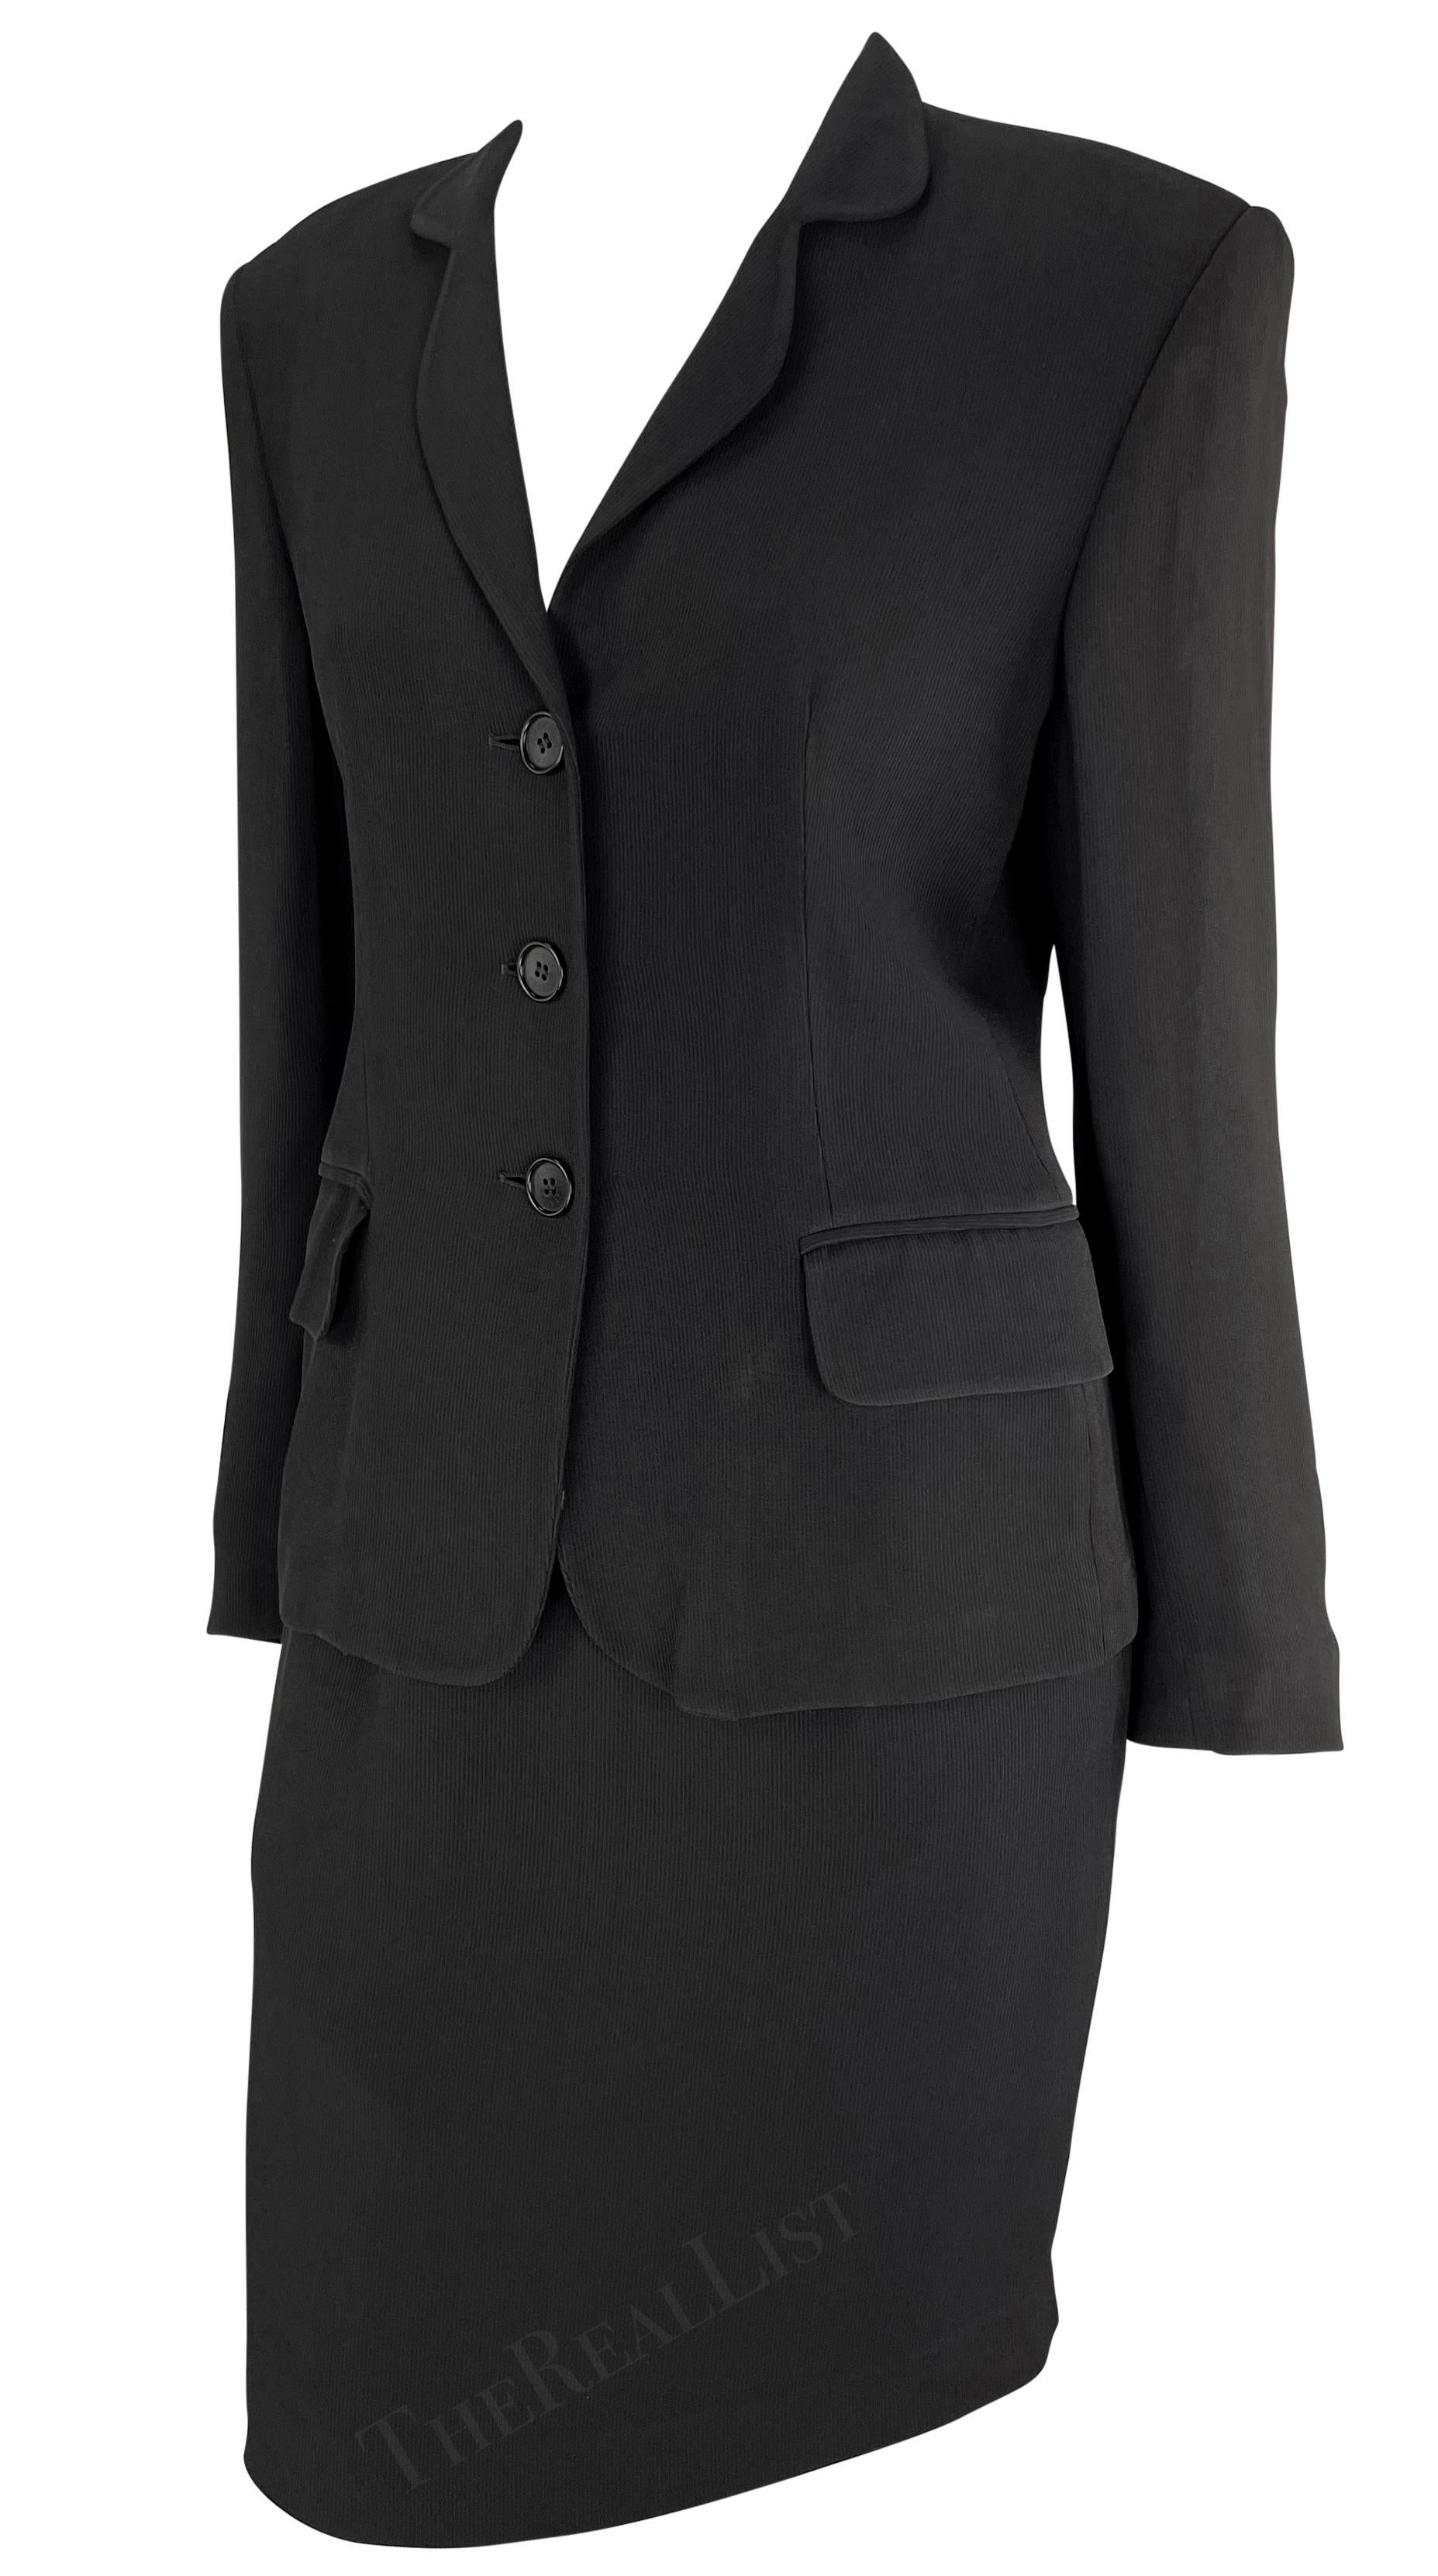 Presenting a chic black Gucci skirt suit. From the early 1990s, this classic black skirt suit is constructed of a blazer and matching pencil skirt.

Approximate measurements:
Jacket Size -  42IT
Shoulder to cuff: 24